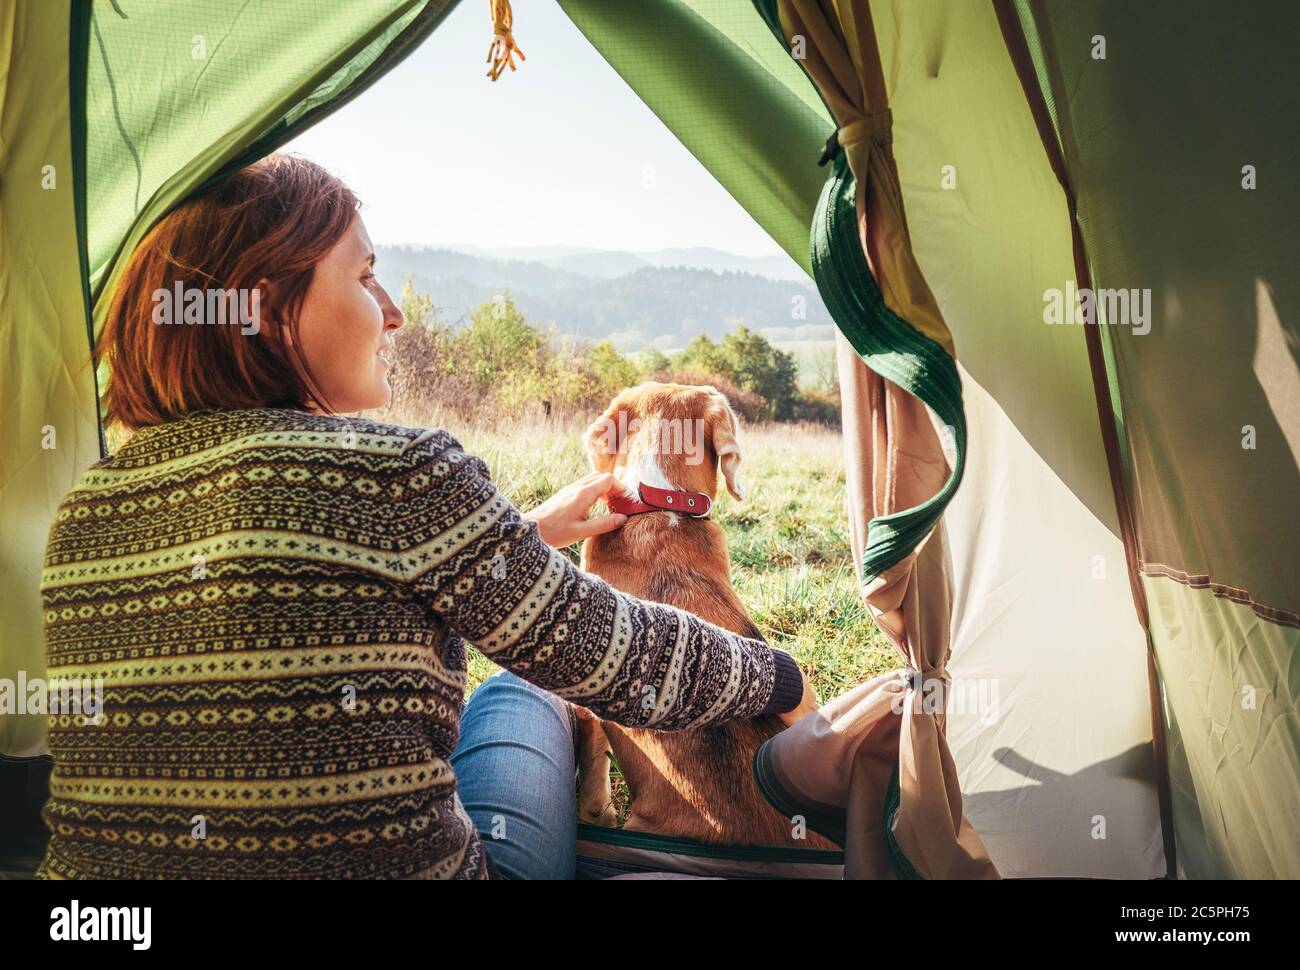 Woman with her pet beagle dog resting in camping tent	. People in outdoor concept image. Stock Photo